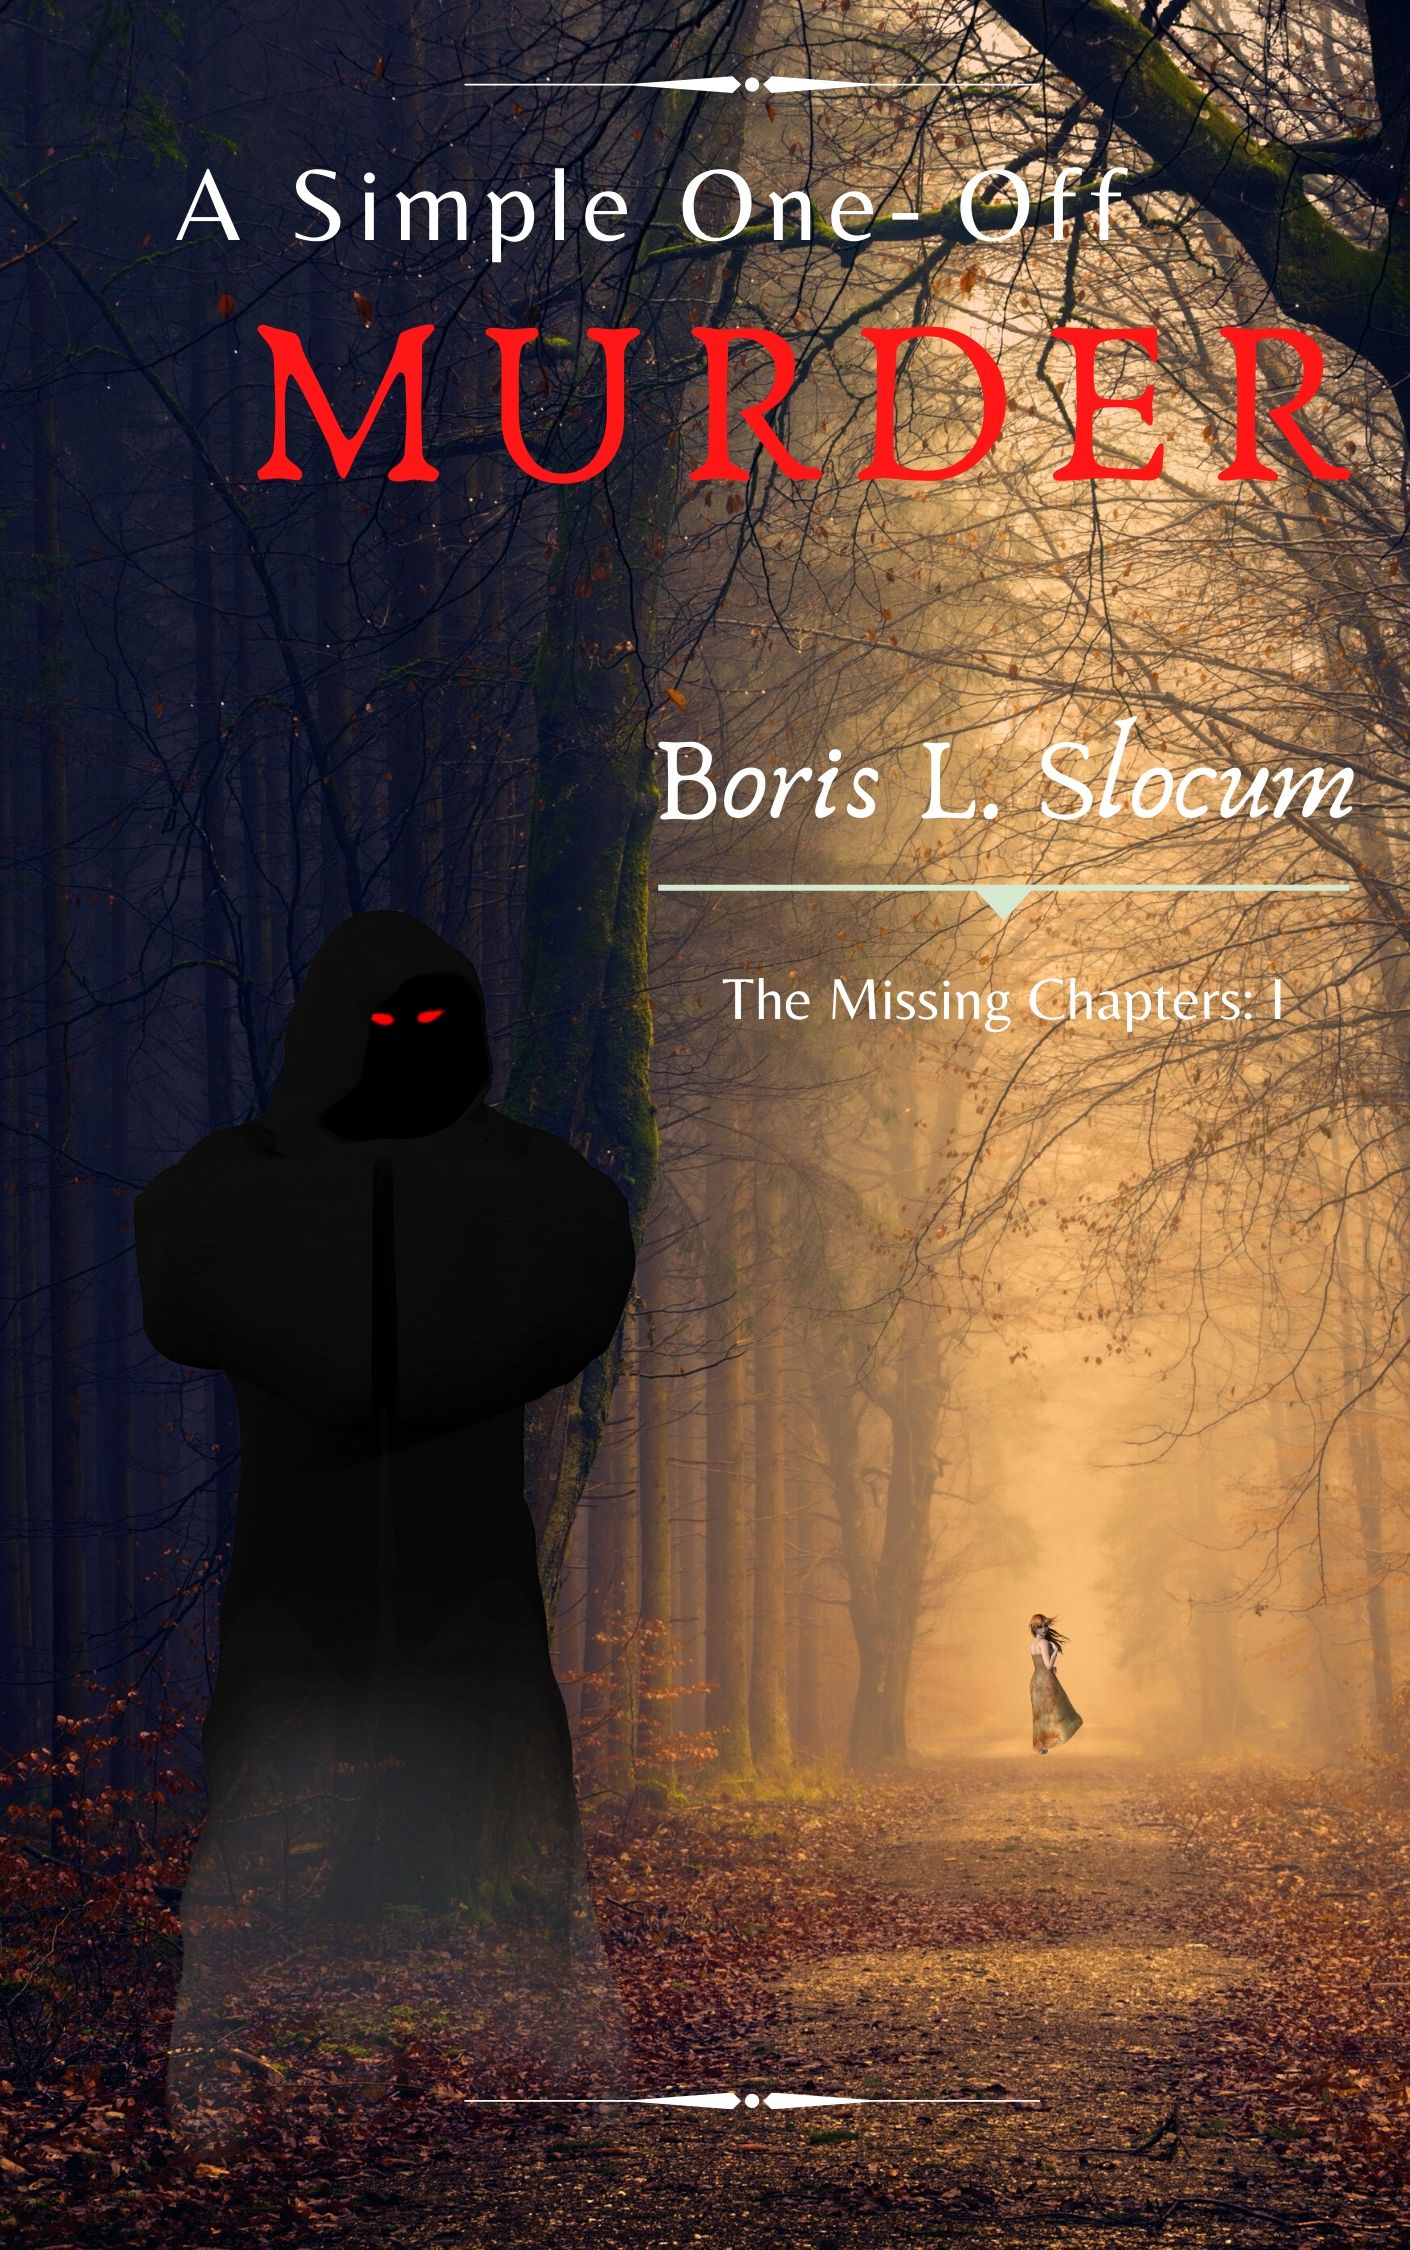 FREE: A Simple One-Off Murder by Boris L. Slocum